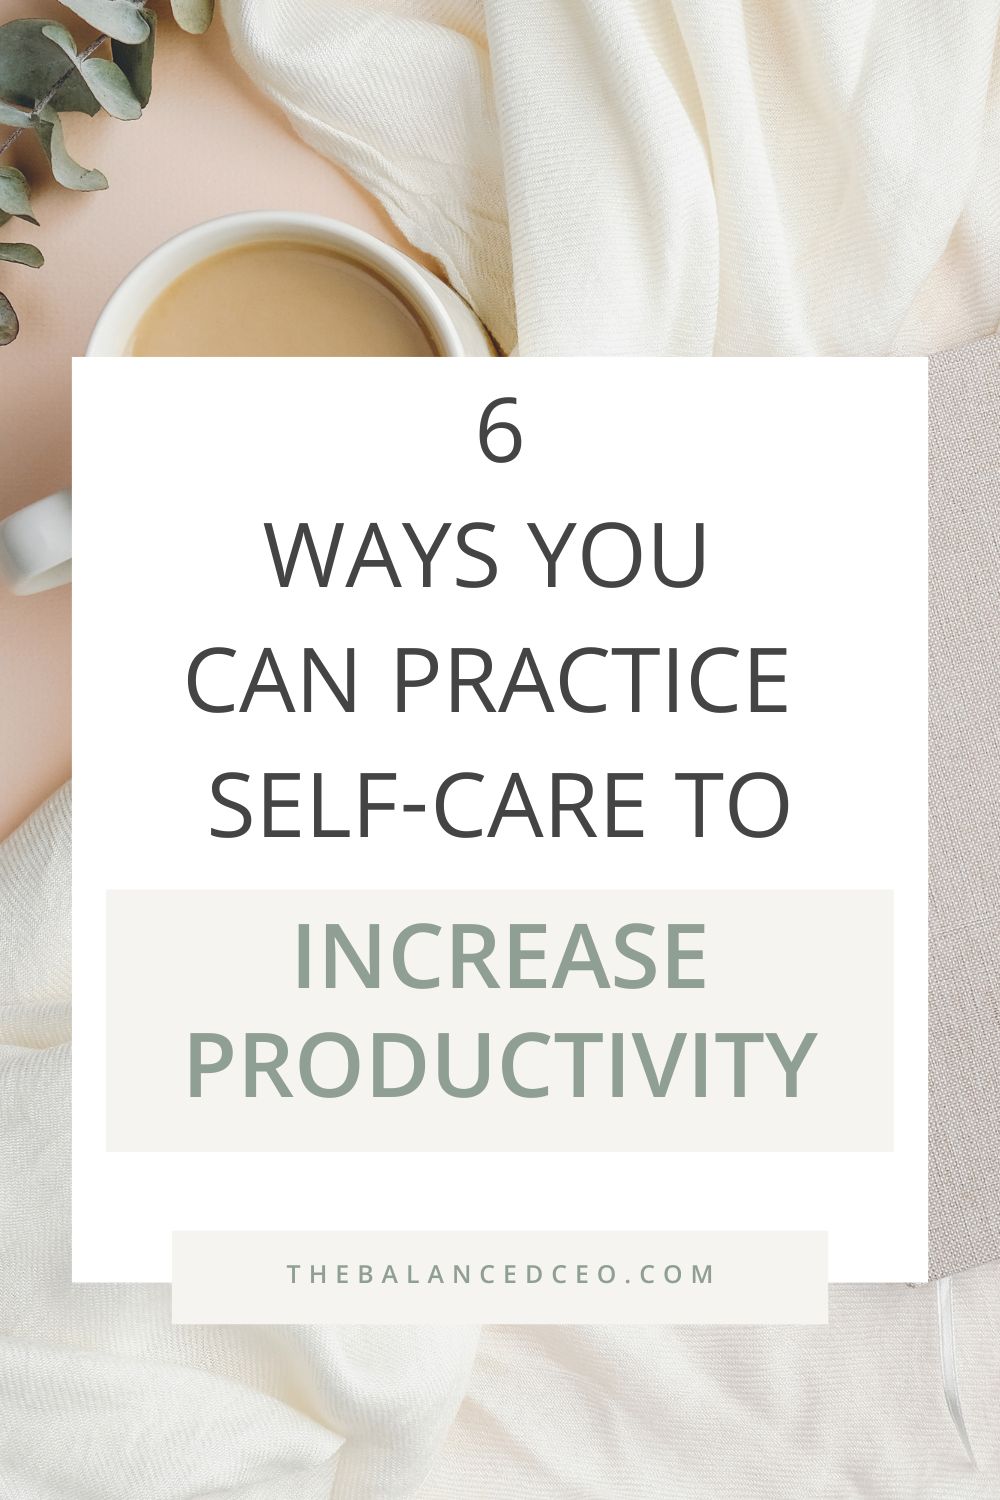 6 Ways You Can Practice Self-Care to Increase Productivity